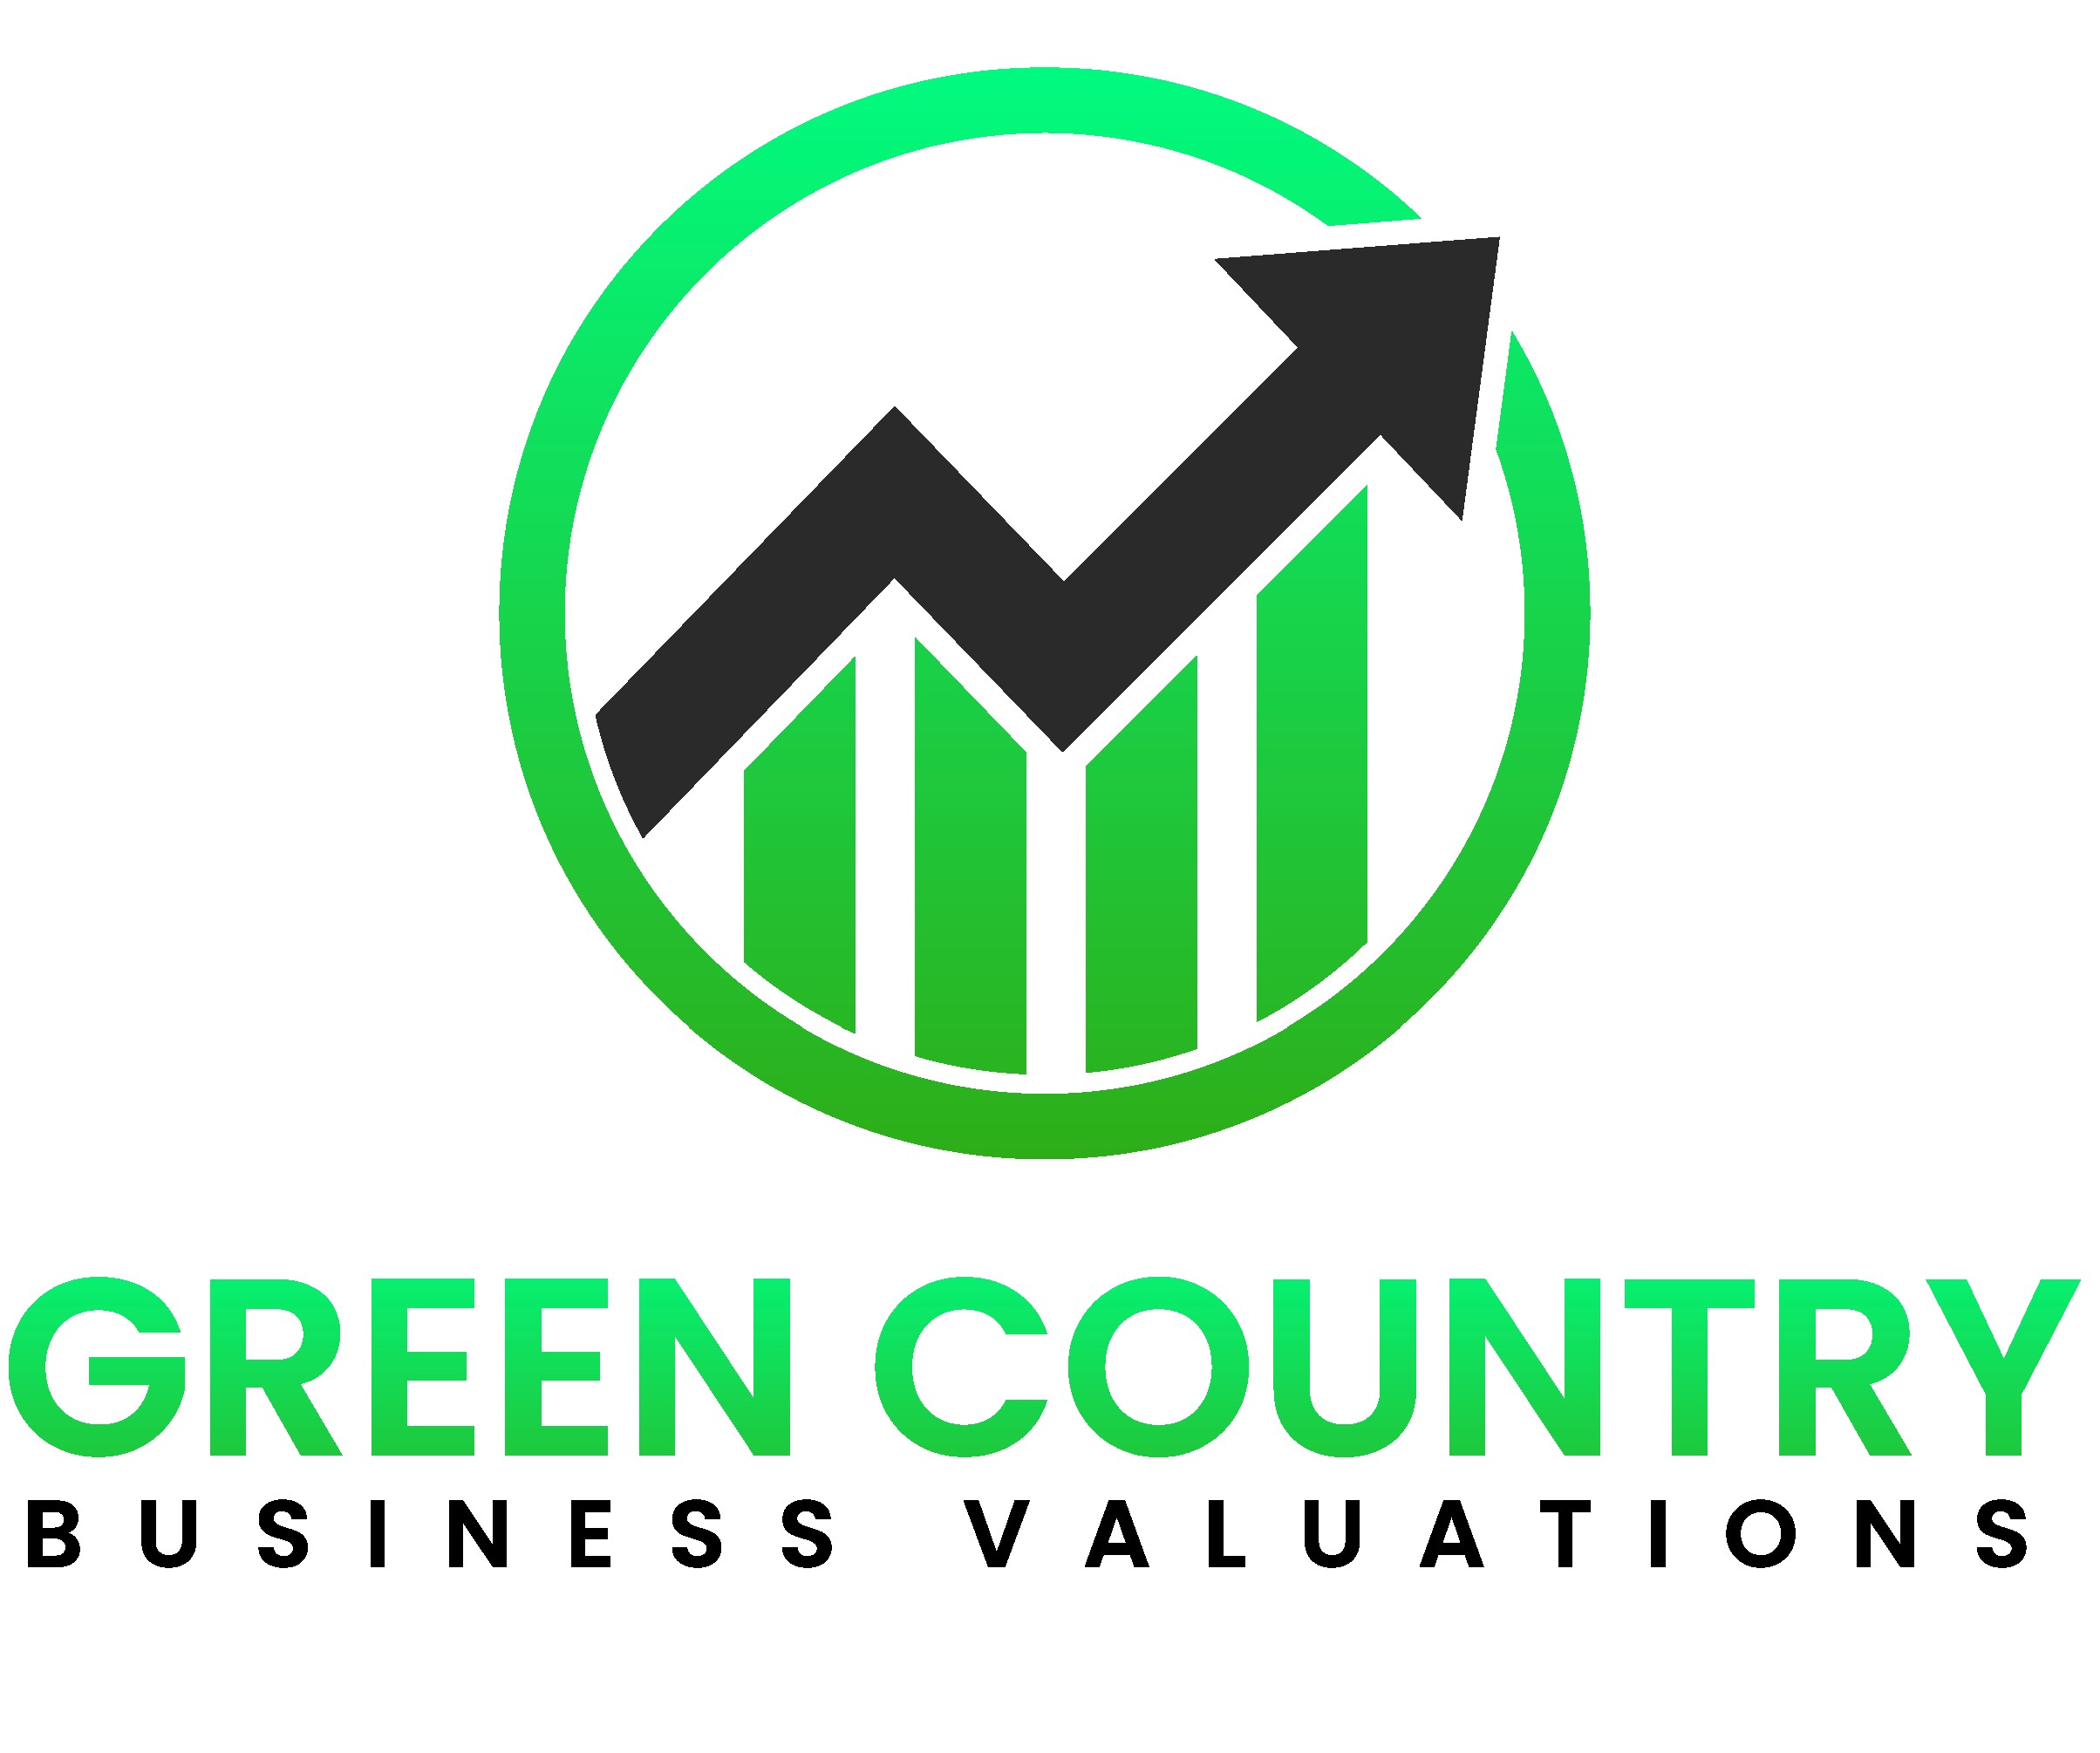 Green Country Business Valuations, LLC